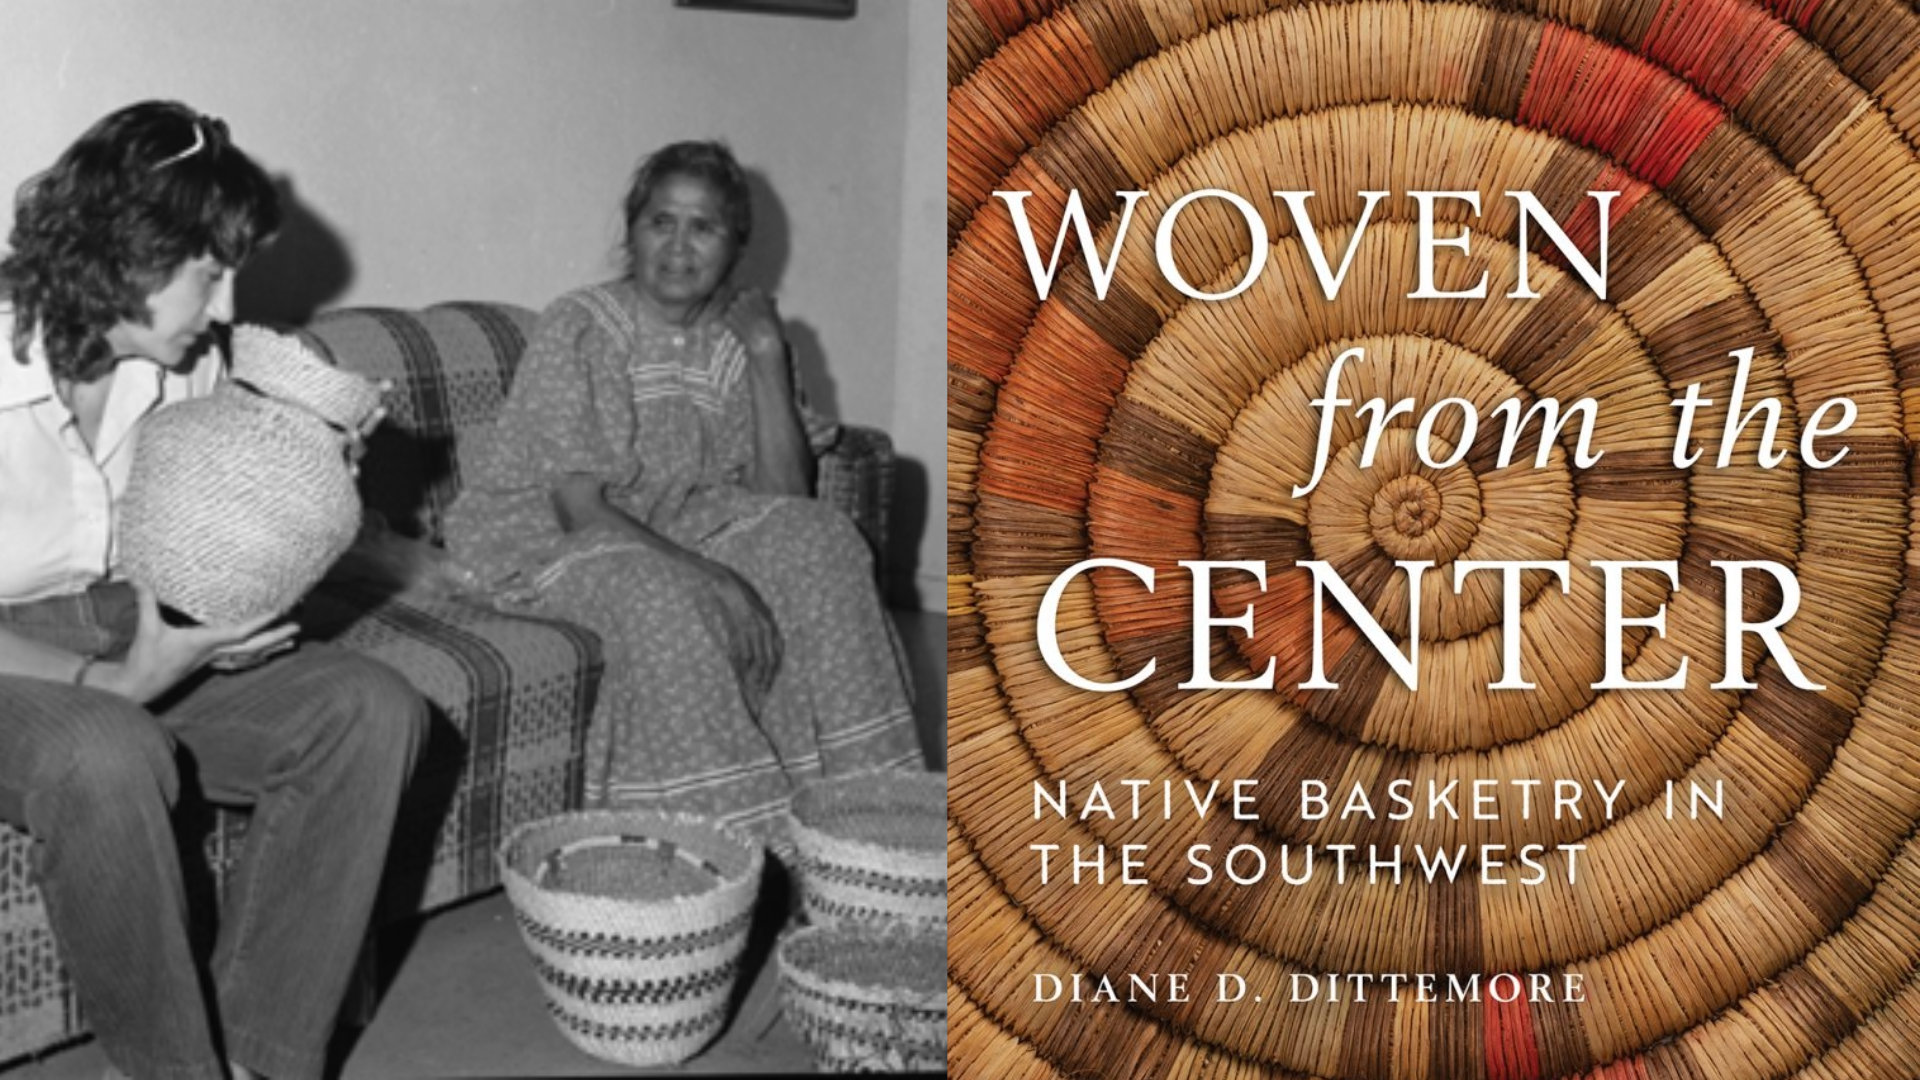 Field Notes: Writing “Woven From the Center: Native Basketry in the Southwest”